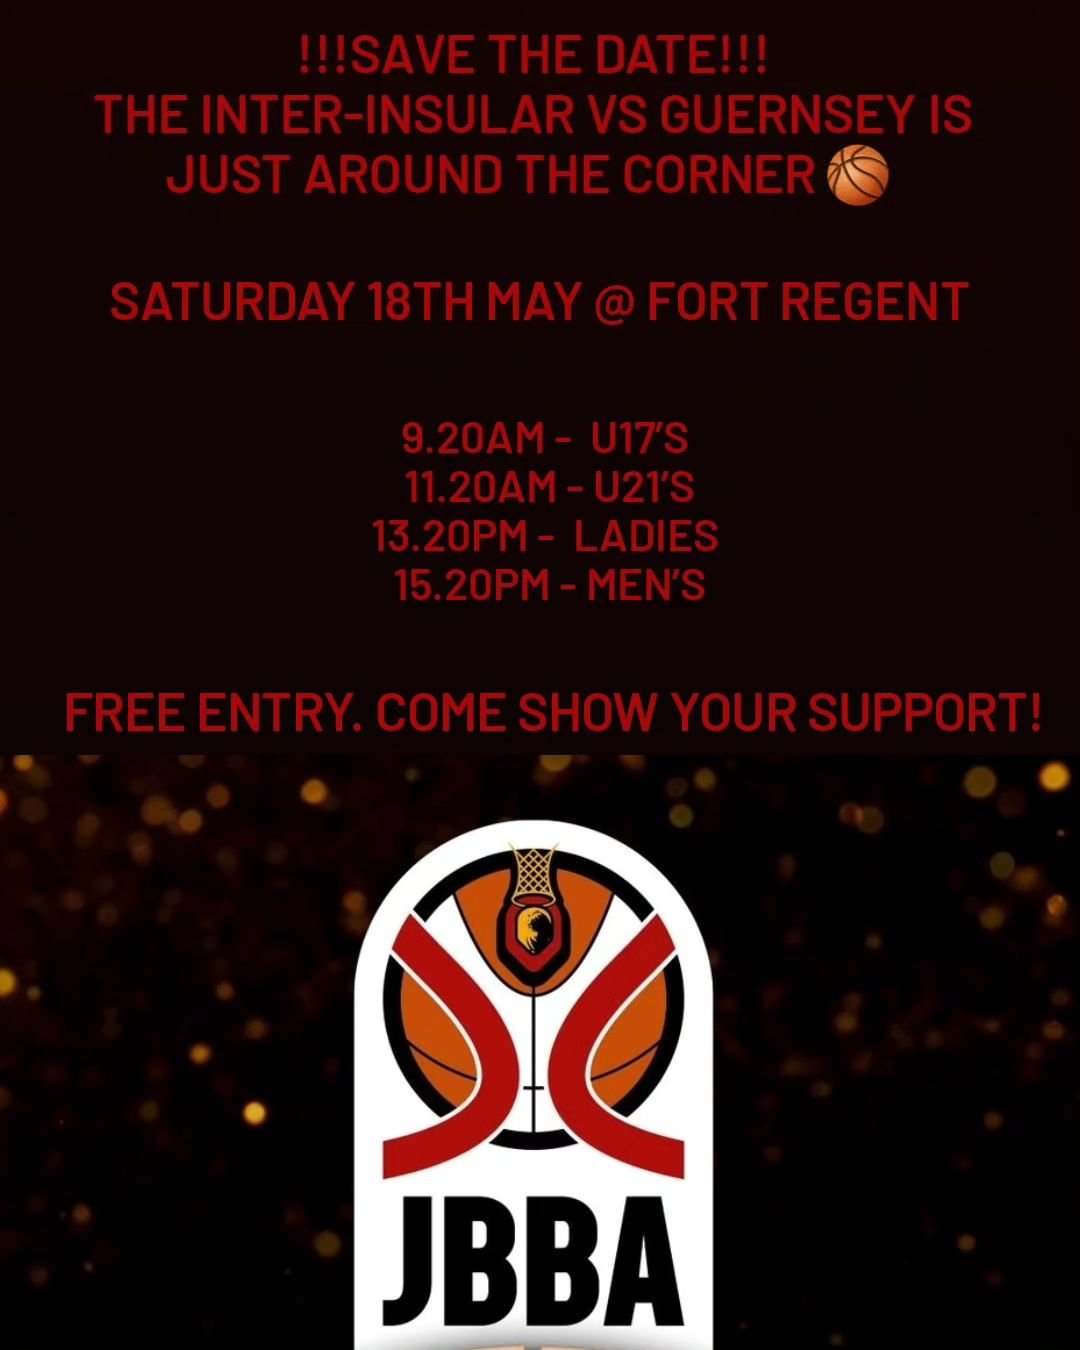 Save the date!!!

Jersey vs Guernsey inter-insulars!

Saturday 18th May 2024 at Fort Regent!

Schedule:

9.20am - U17&rsquo;s 
11.20am - U21&rsquo;s
13.20pm - Ladies 
15.20pm - Men&rsquo;s

🏀 🏀 🏀